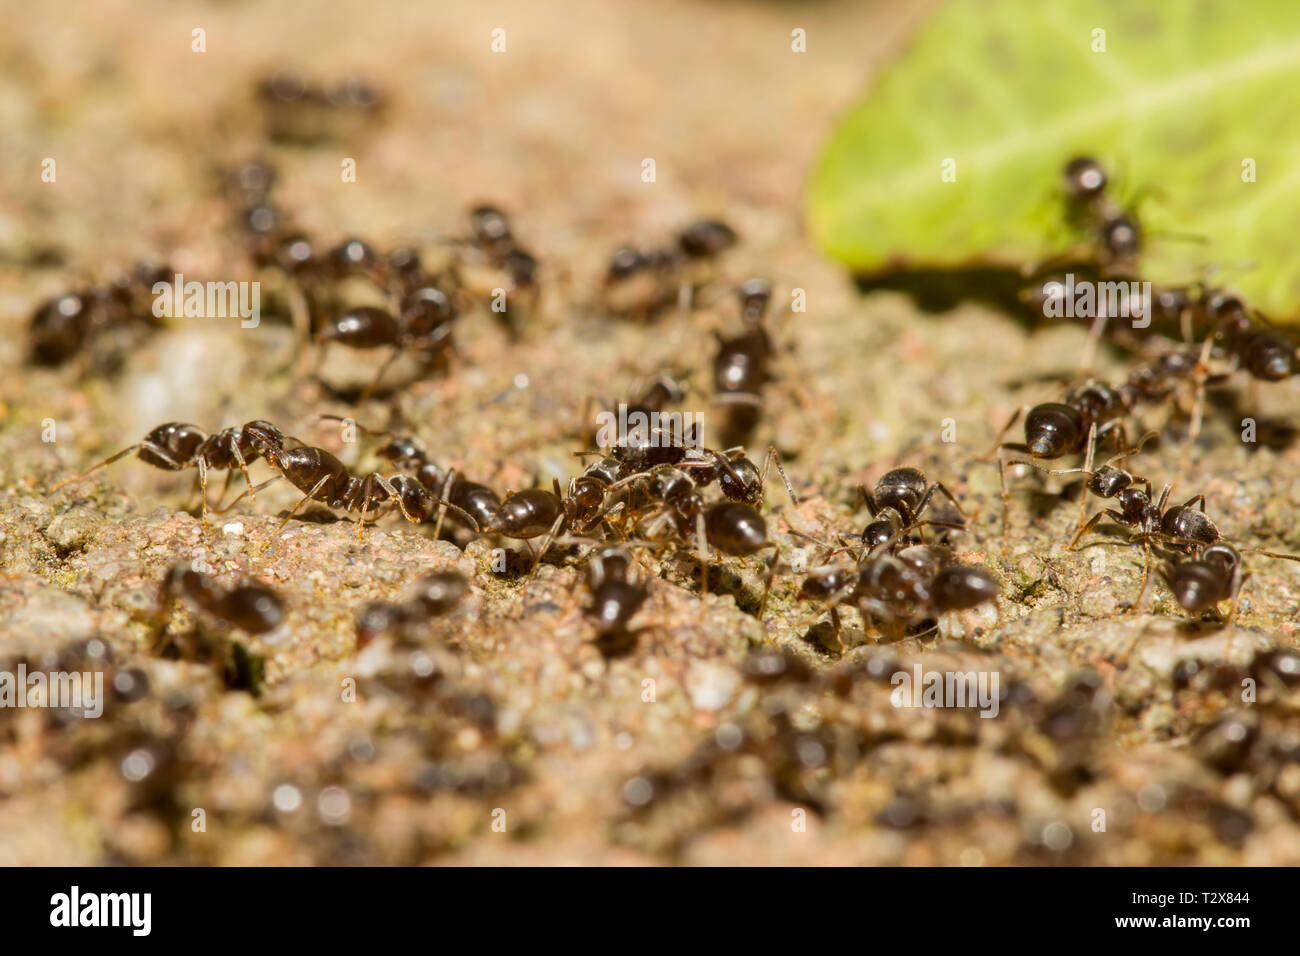 Ameisen, Formicidae, formiche Foto Stock